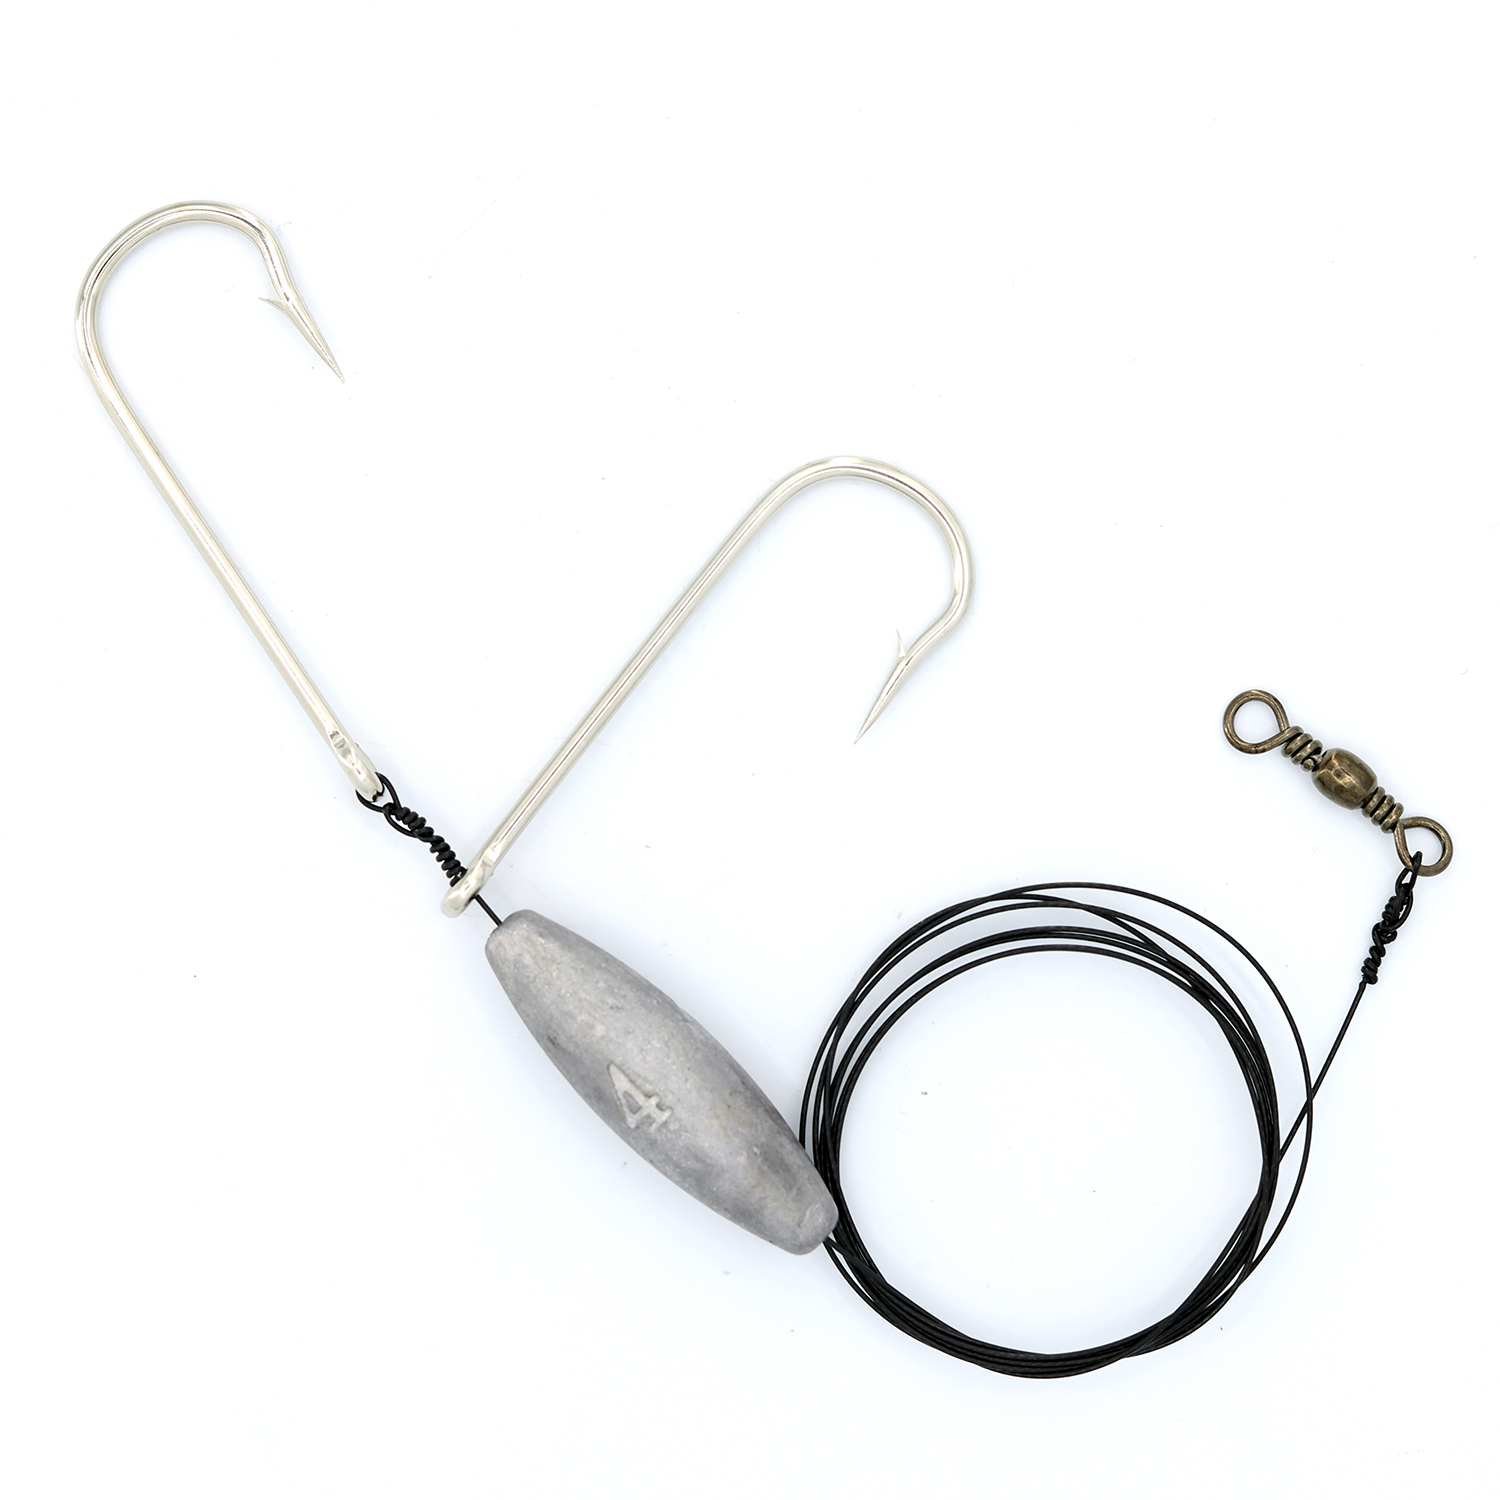 qareb american wire rig with double hooks size 2, sinker size 4 and wire test 90lb